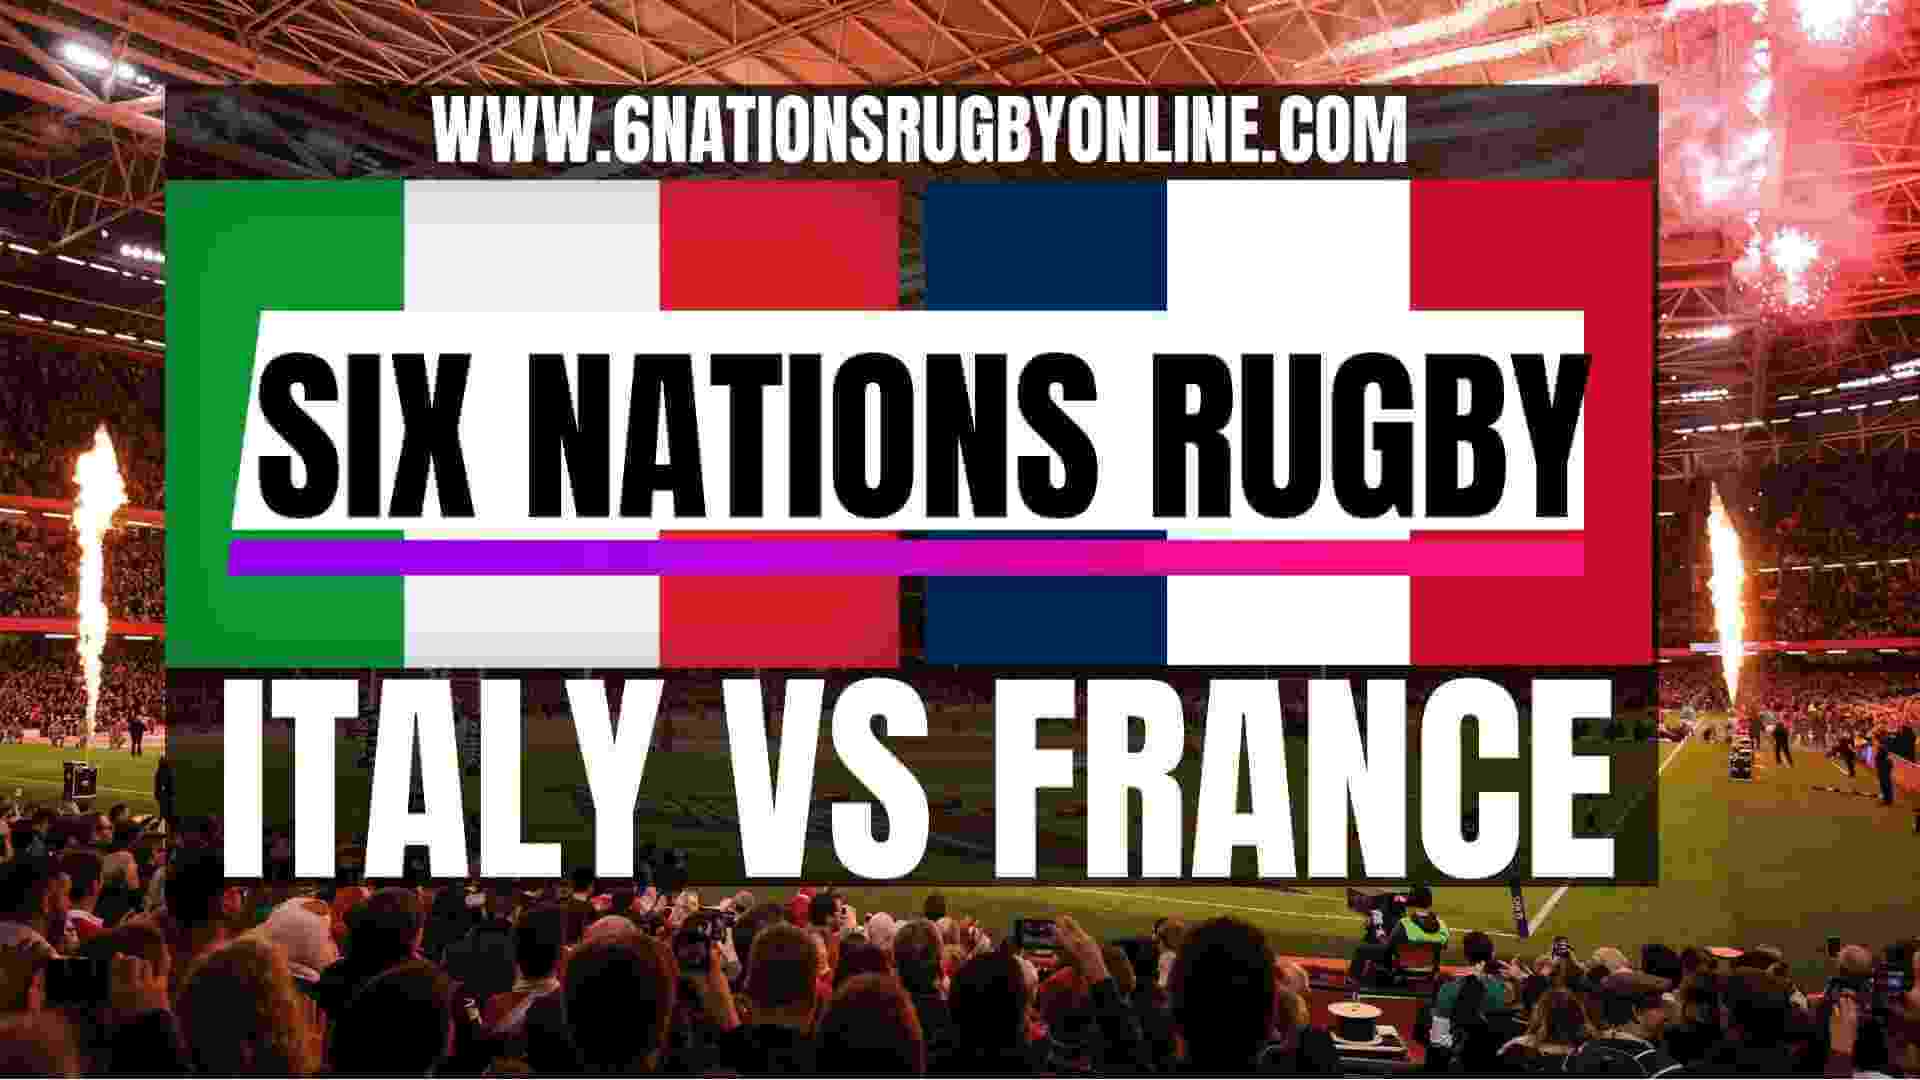 France VS Italy Rugby Live Stream On 16 March 2019